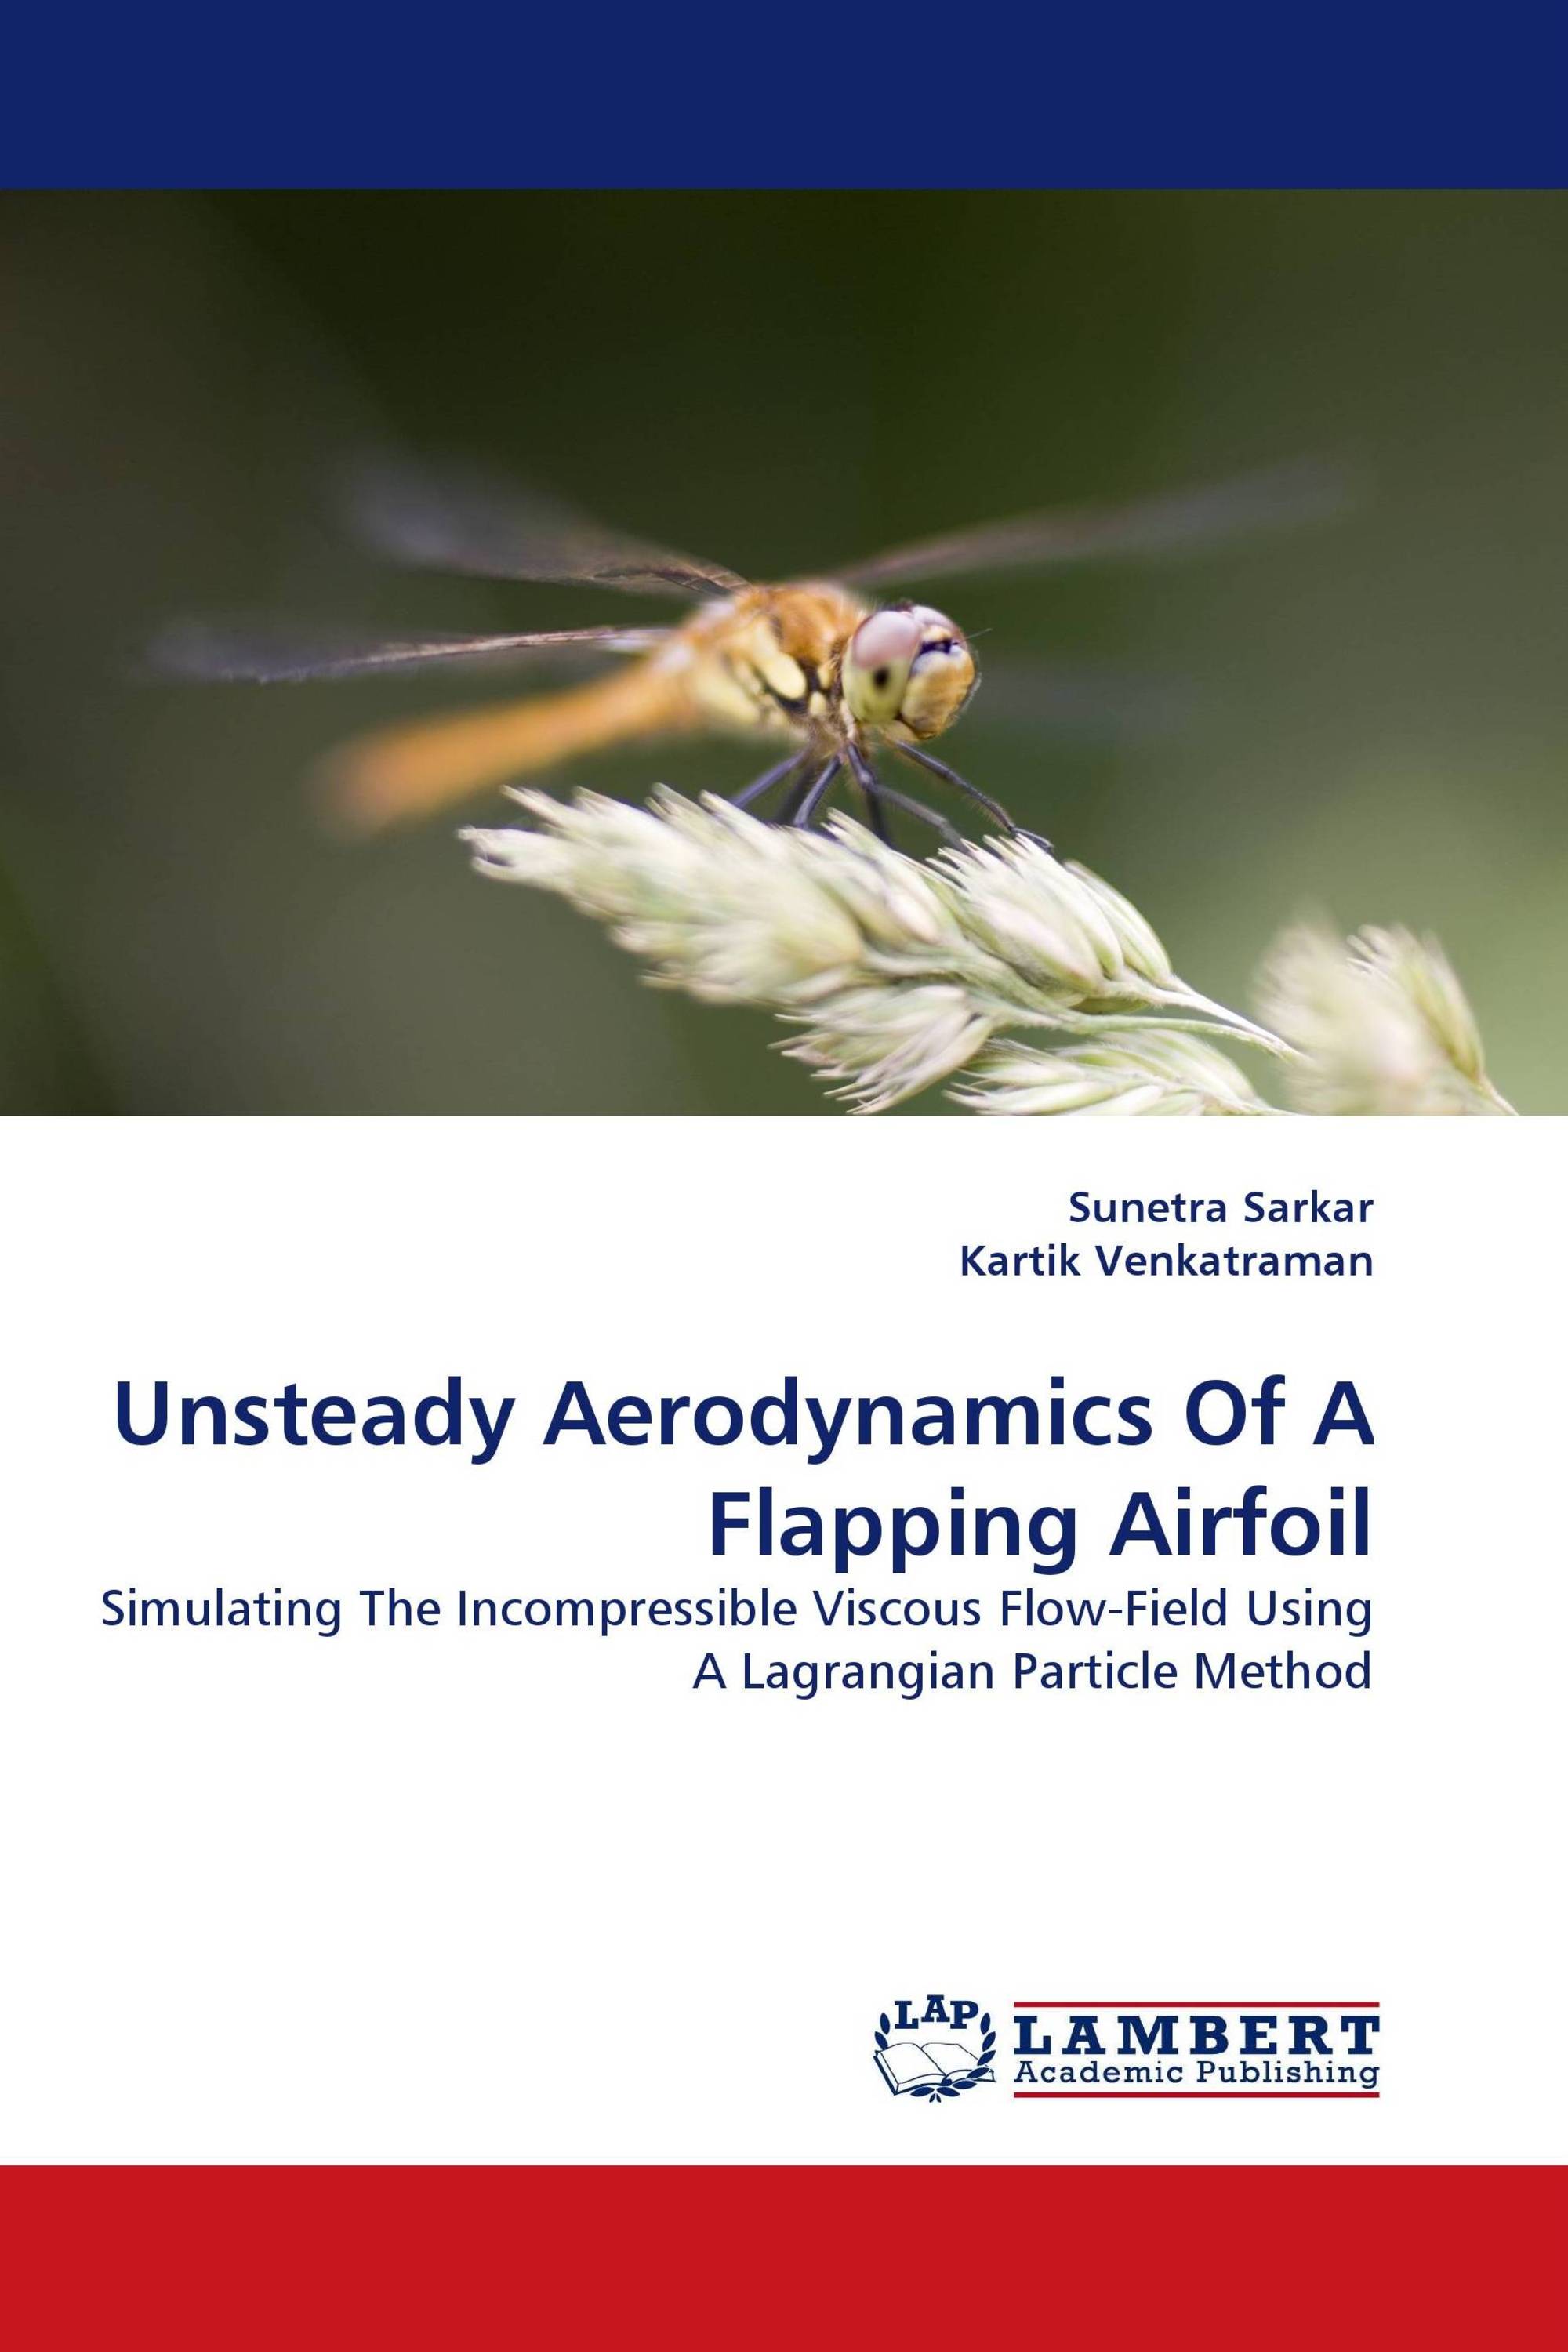 Unsteady Aerodynamics Of A Flapping Airfoil